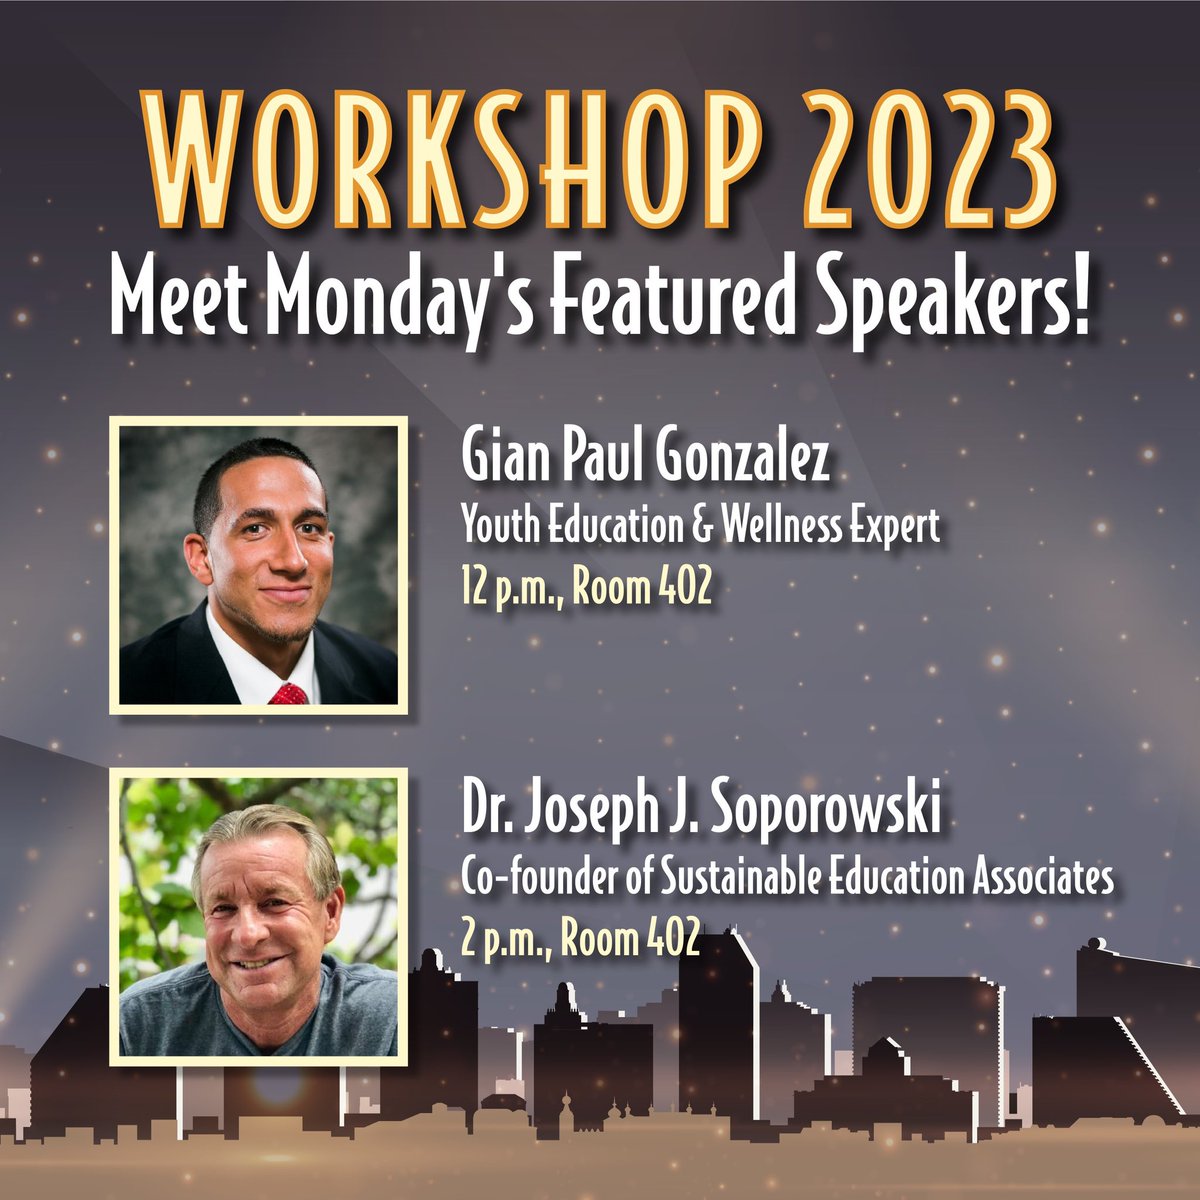 Three days to @njsba Workshop 2023! Our team has been working tirelessly to prepare for the anticipated arrival of our largest attendance EVER! Don’t miss our kickoff with inspirational words from motivational speaker @Gian_Paul_G #allin #allin4NJSBA #NJSBAworkshop